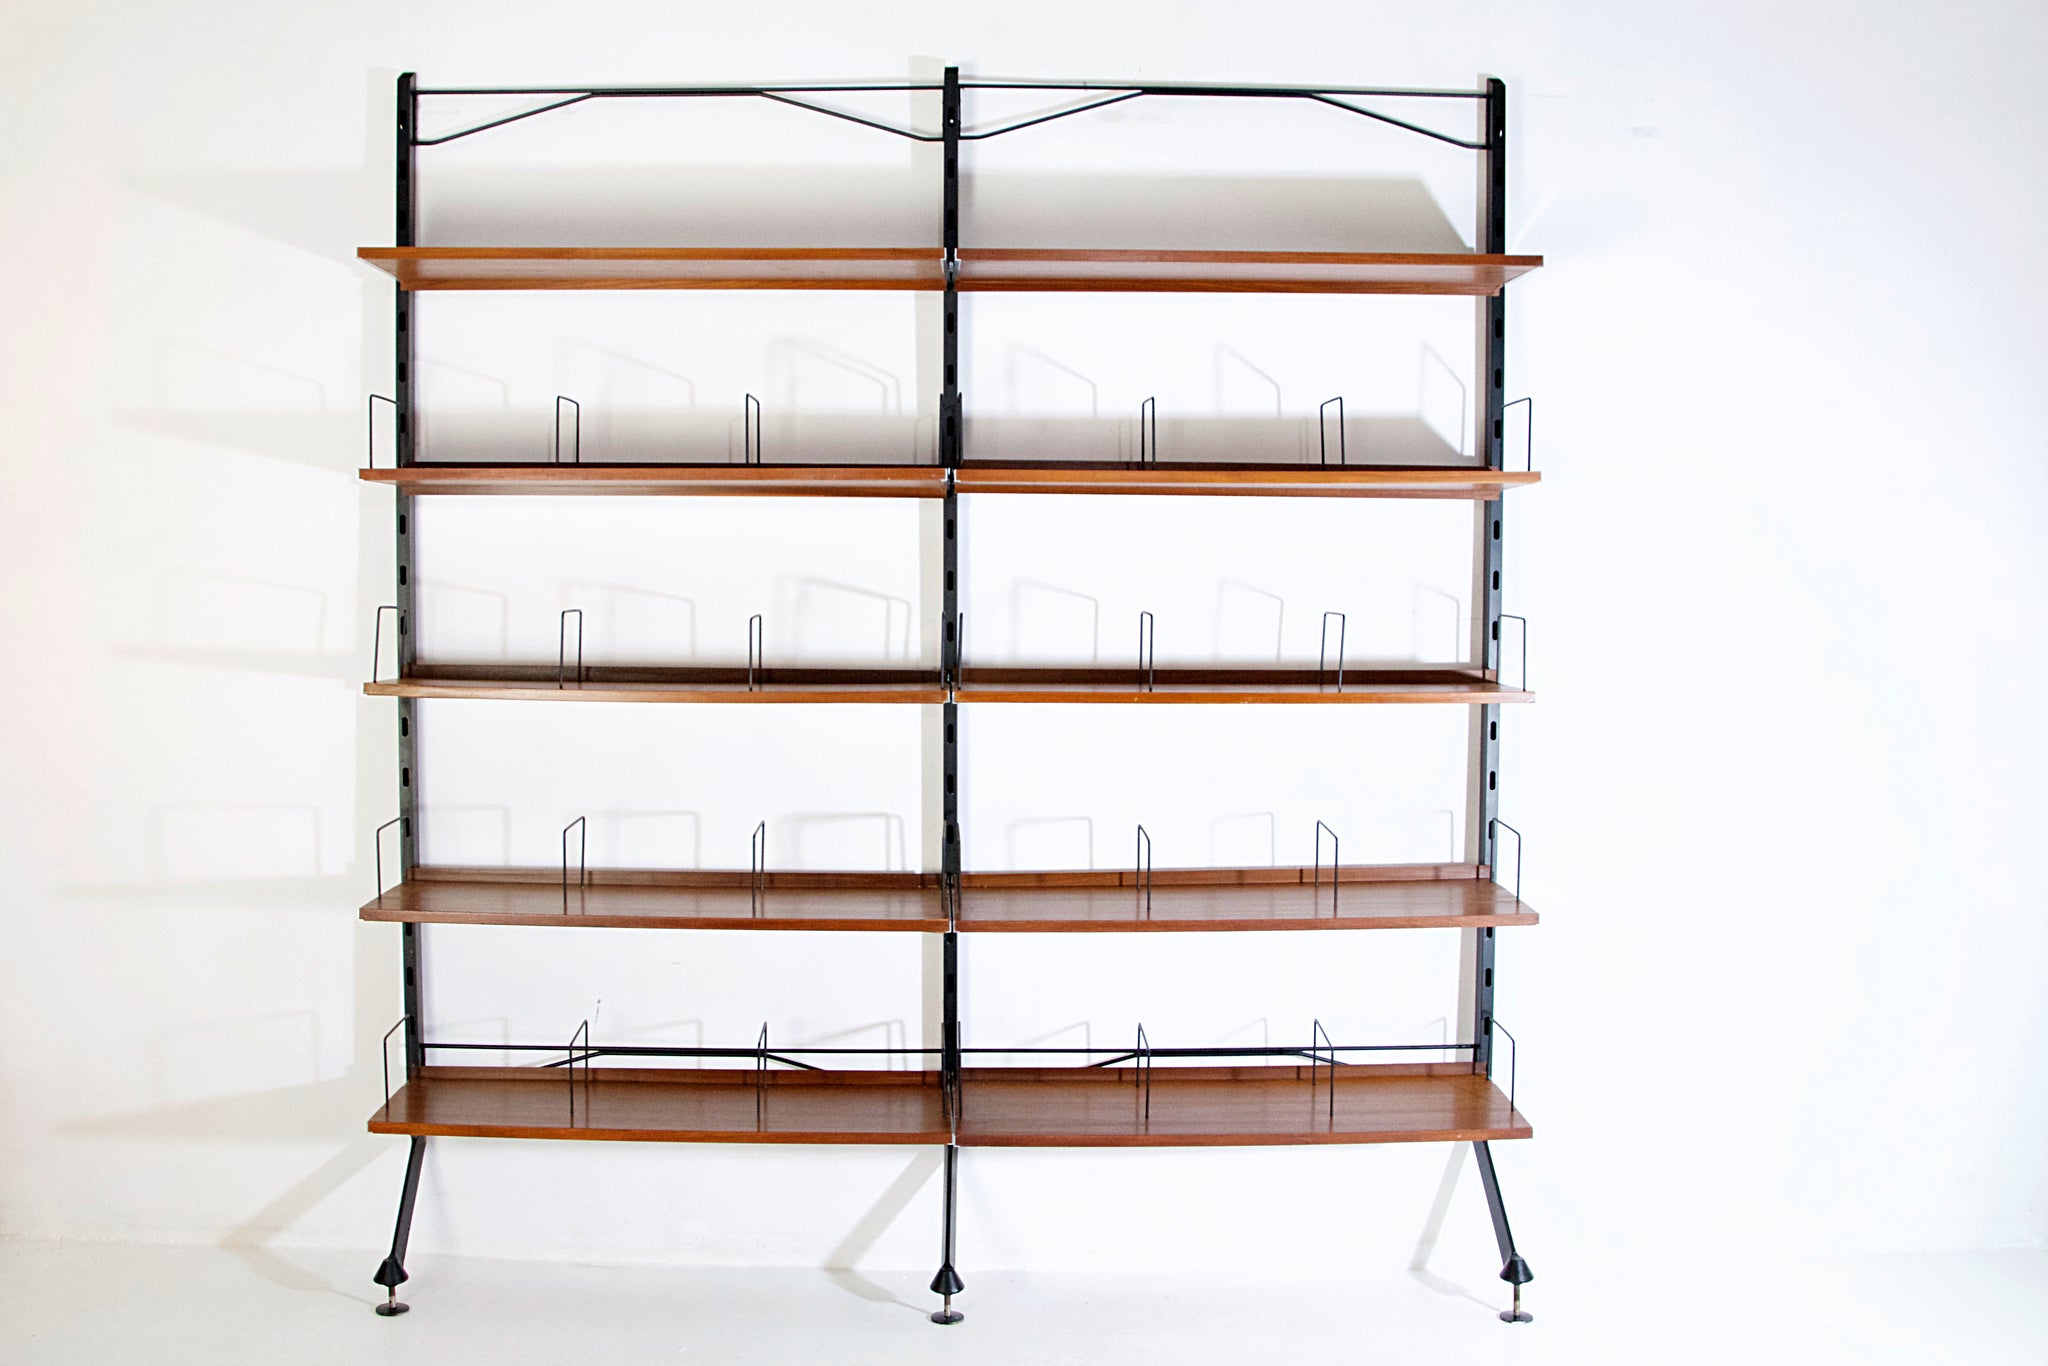 Wall unit designed by Ico Parisi 1958 for MiM, Rome. All shelves are adjustable in height and also has moveable stands for books which are adjustable. The unit is designed to lean on a wall. It has holes so it can be fastened in a wall.

Expertise